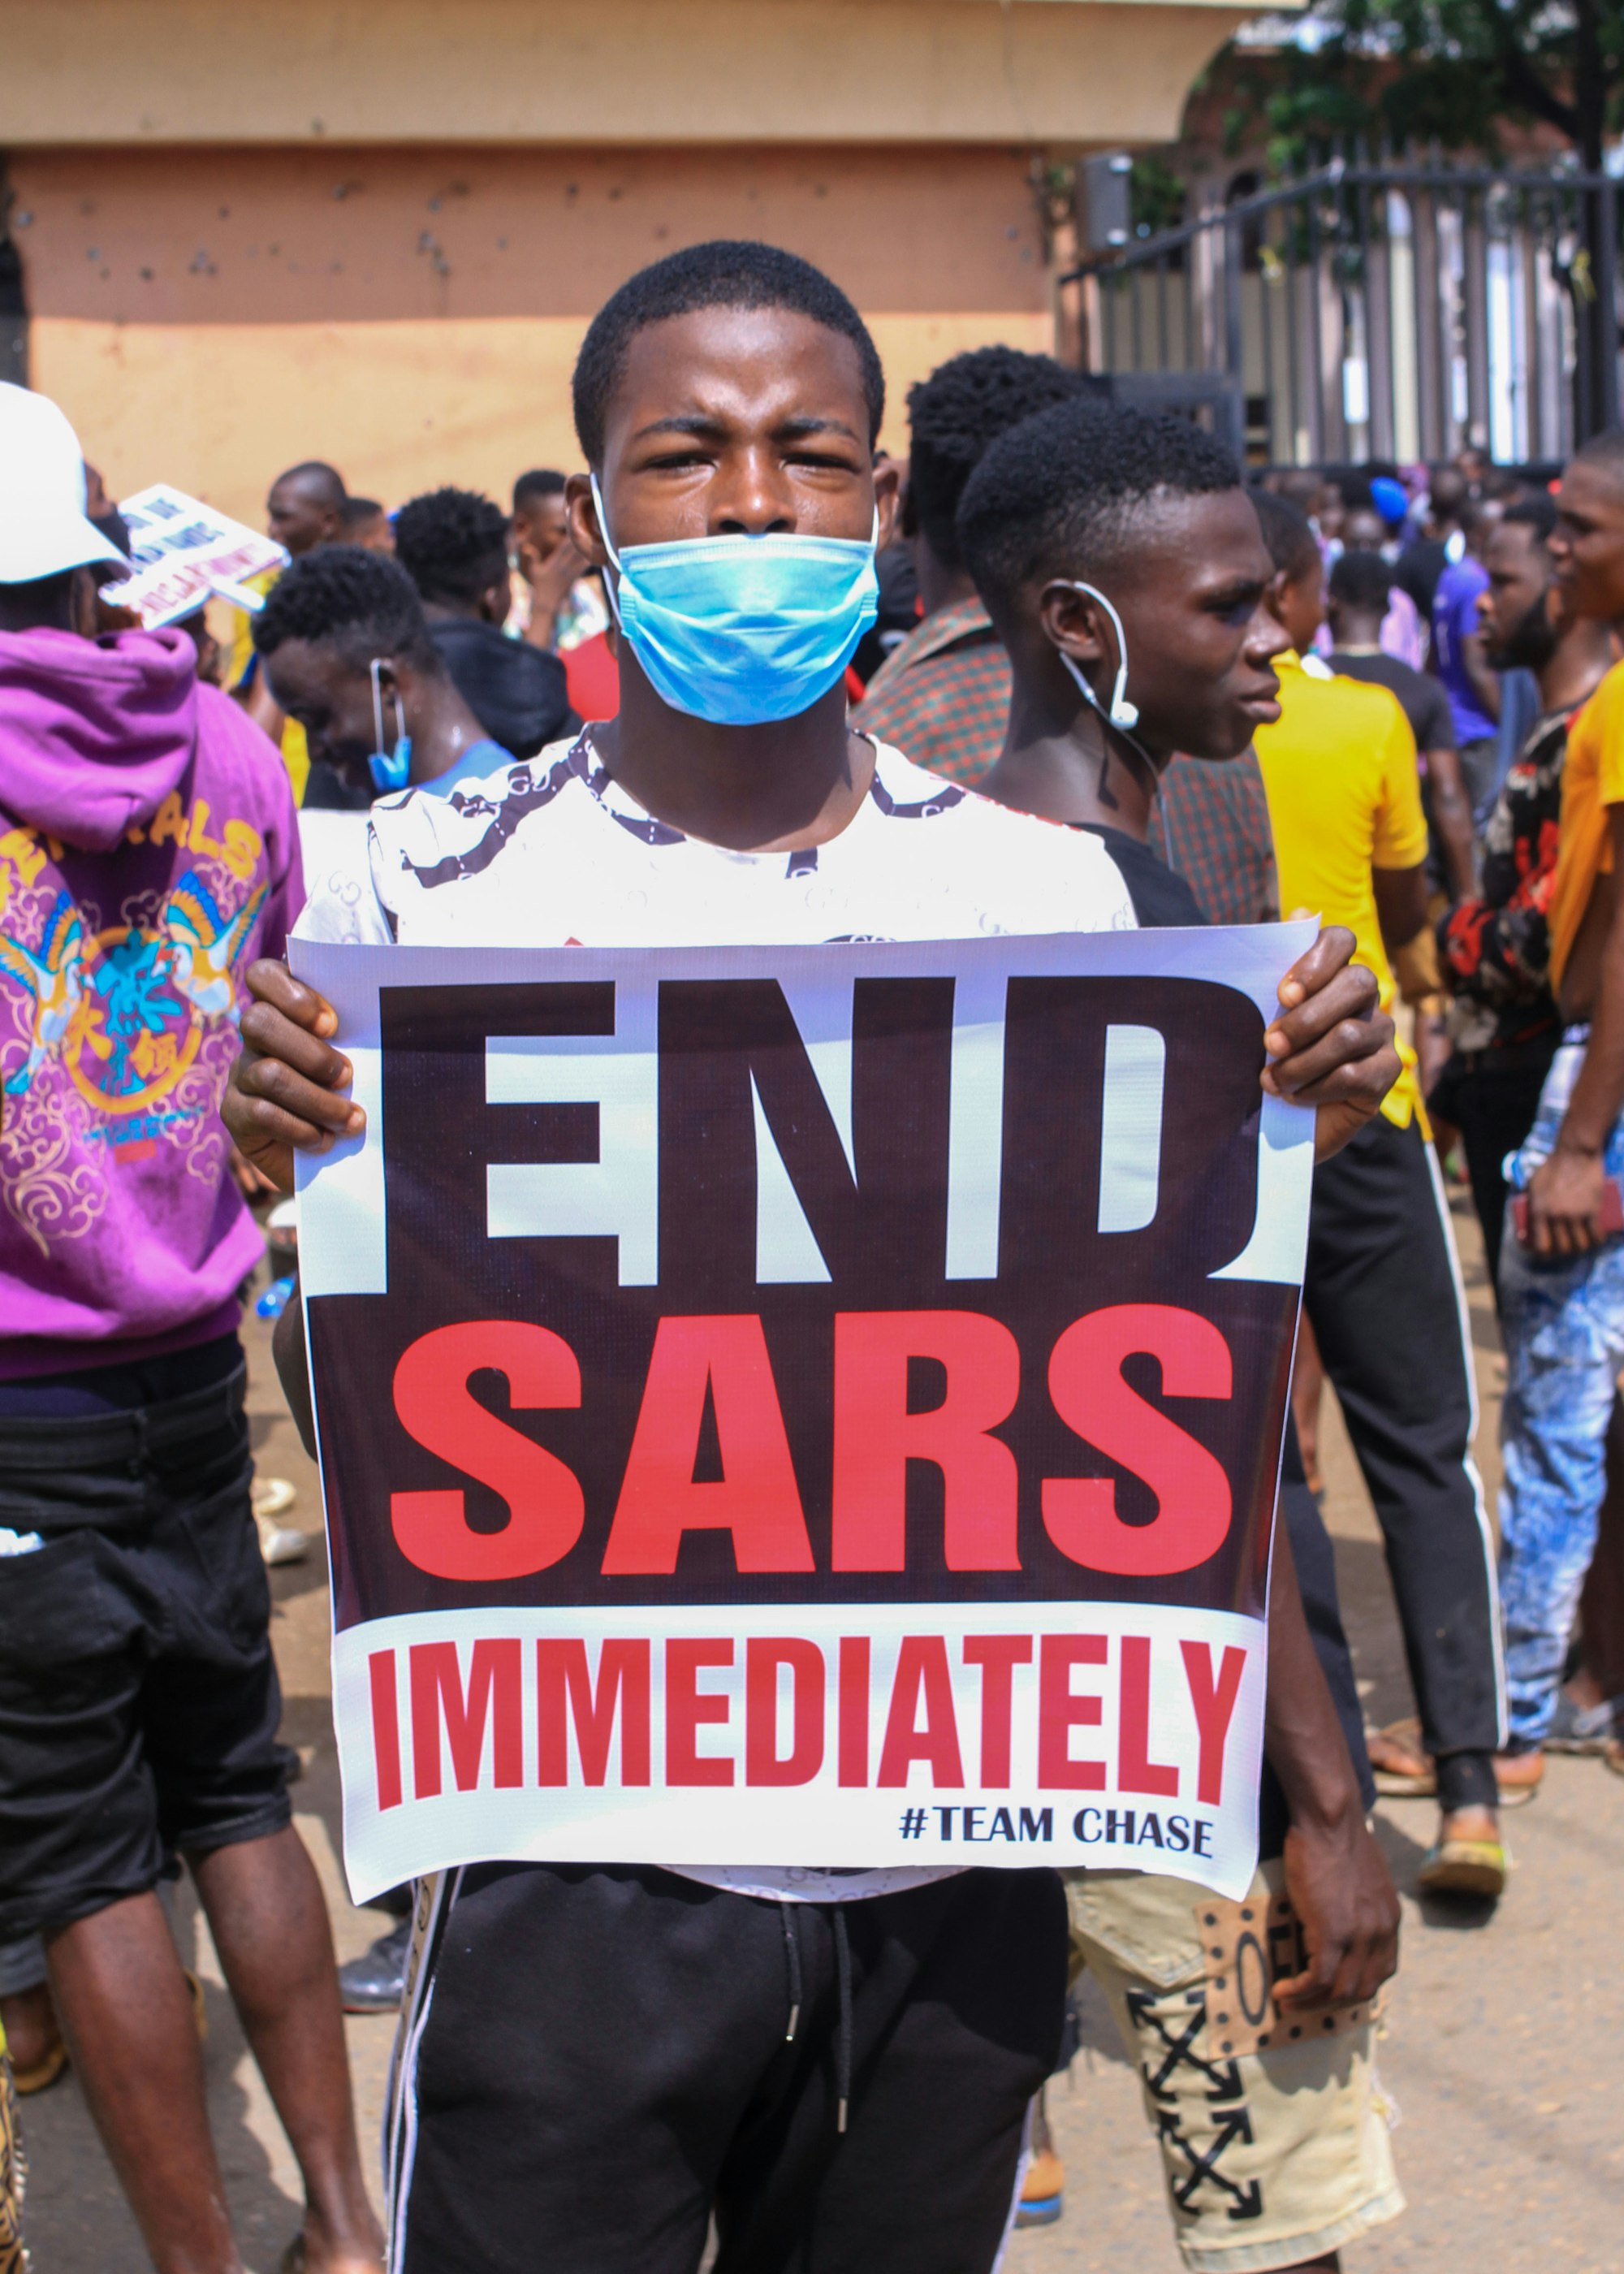 On going Protest in Nigeria 🇳🇬 to End SARS killing,